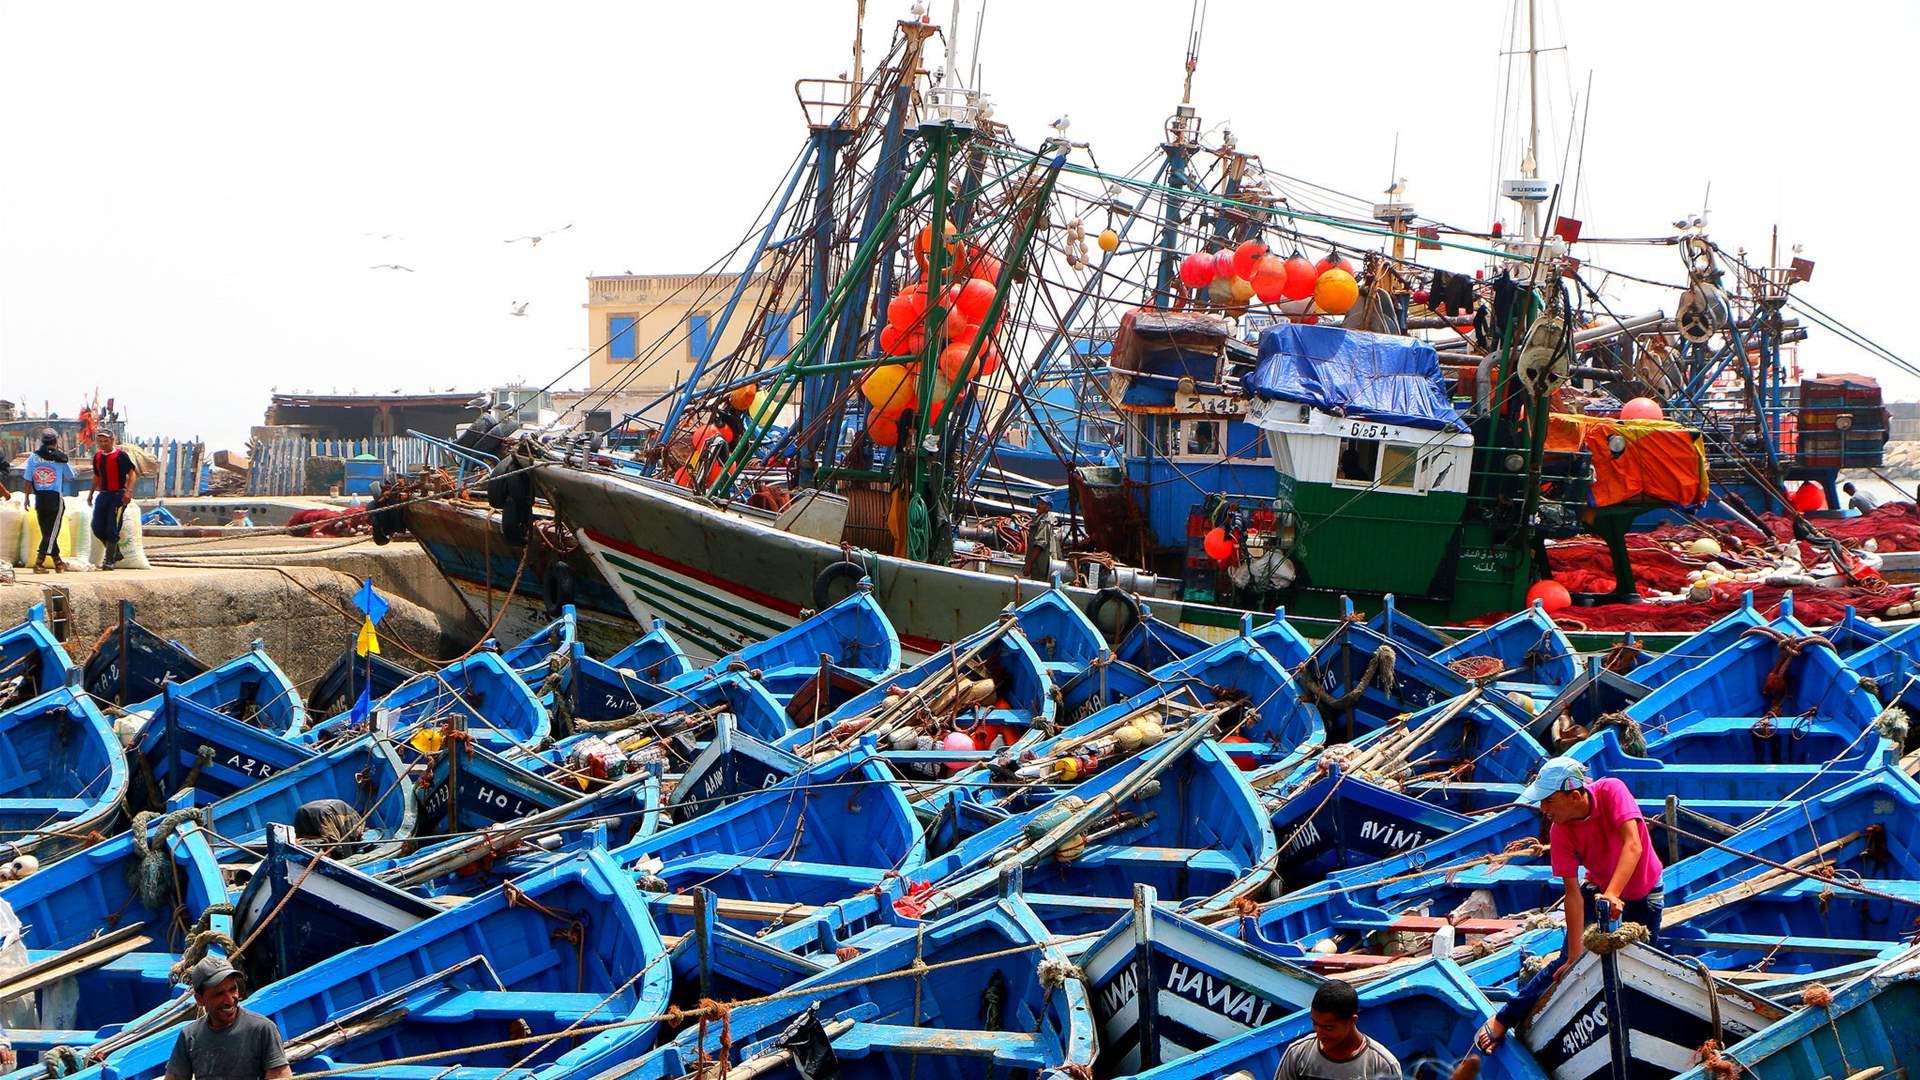 EU ready to conclude new fishing agreement with Morocco